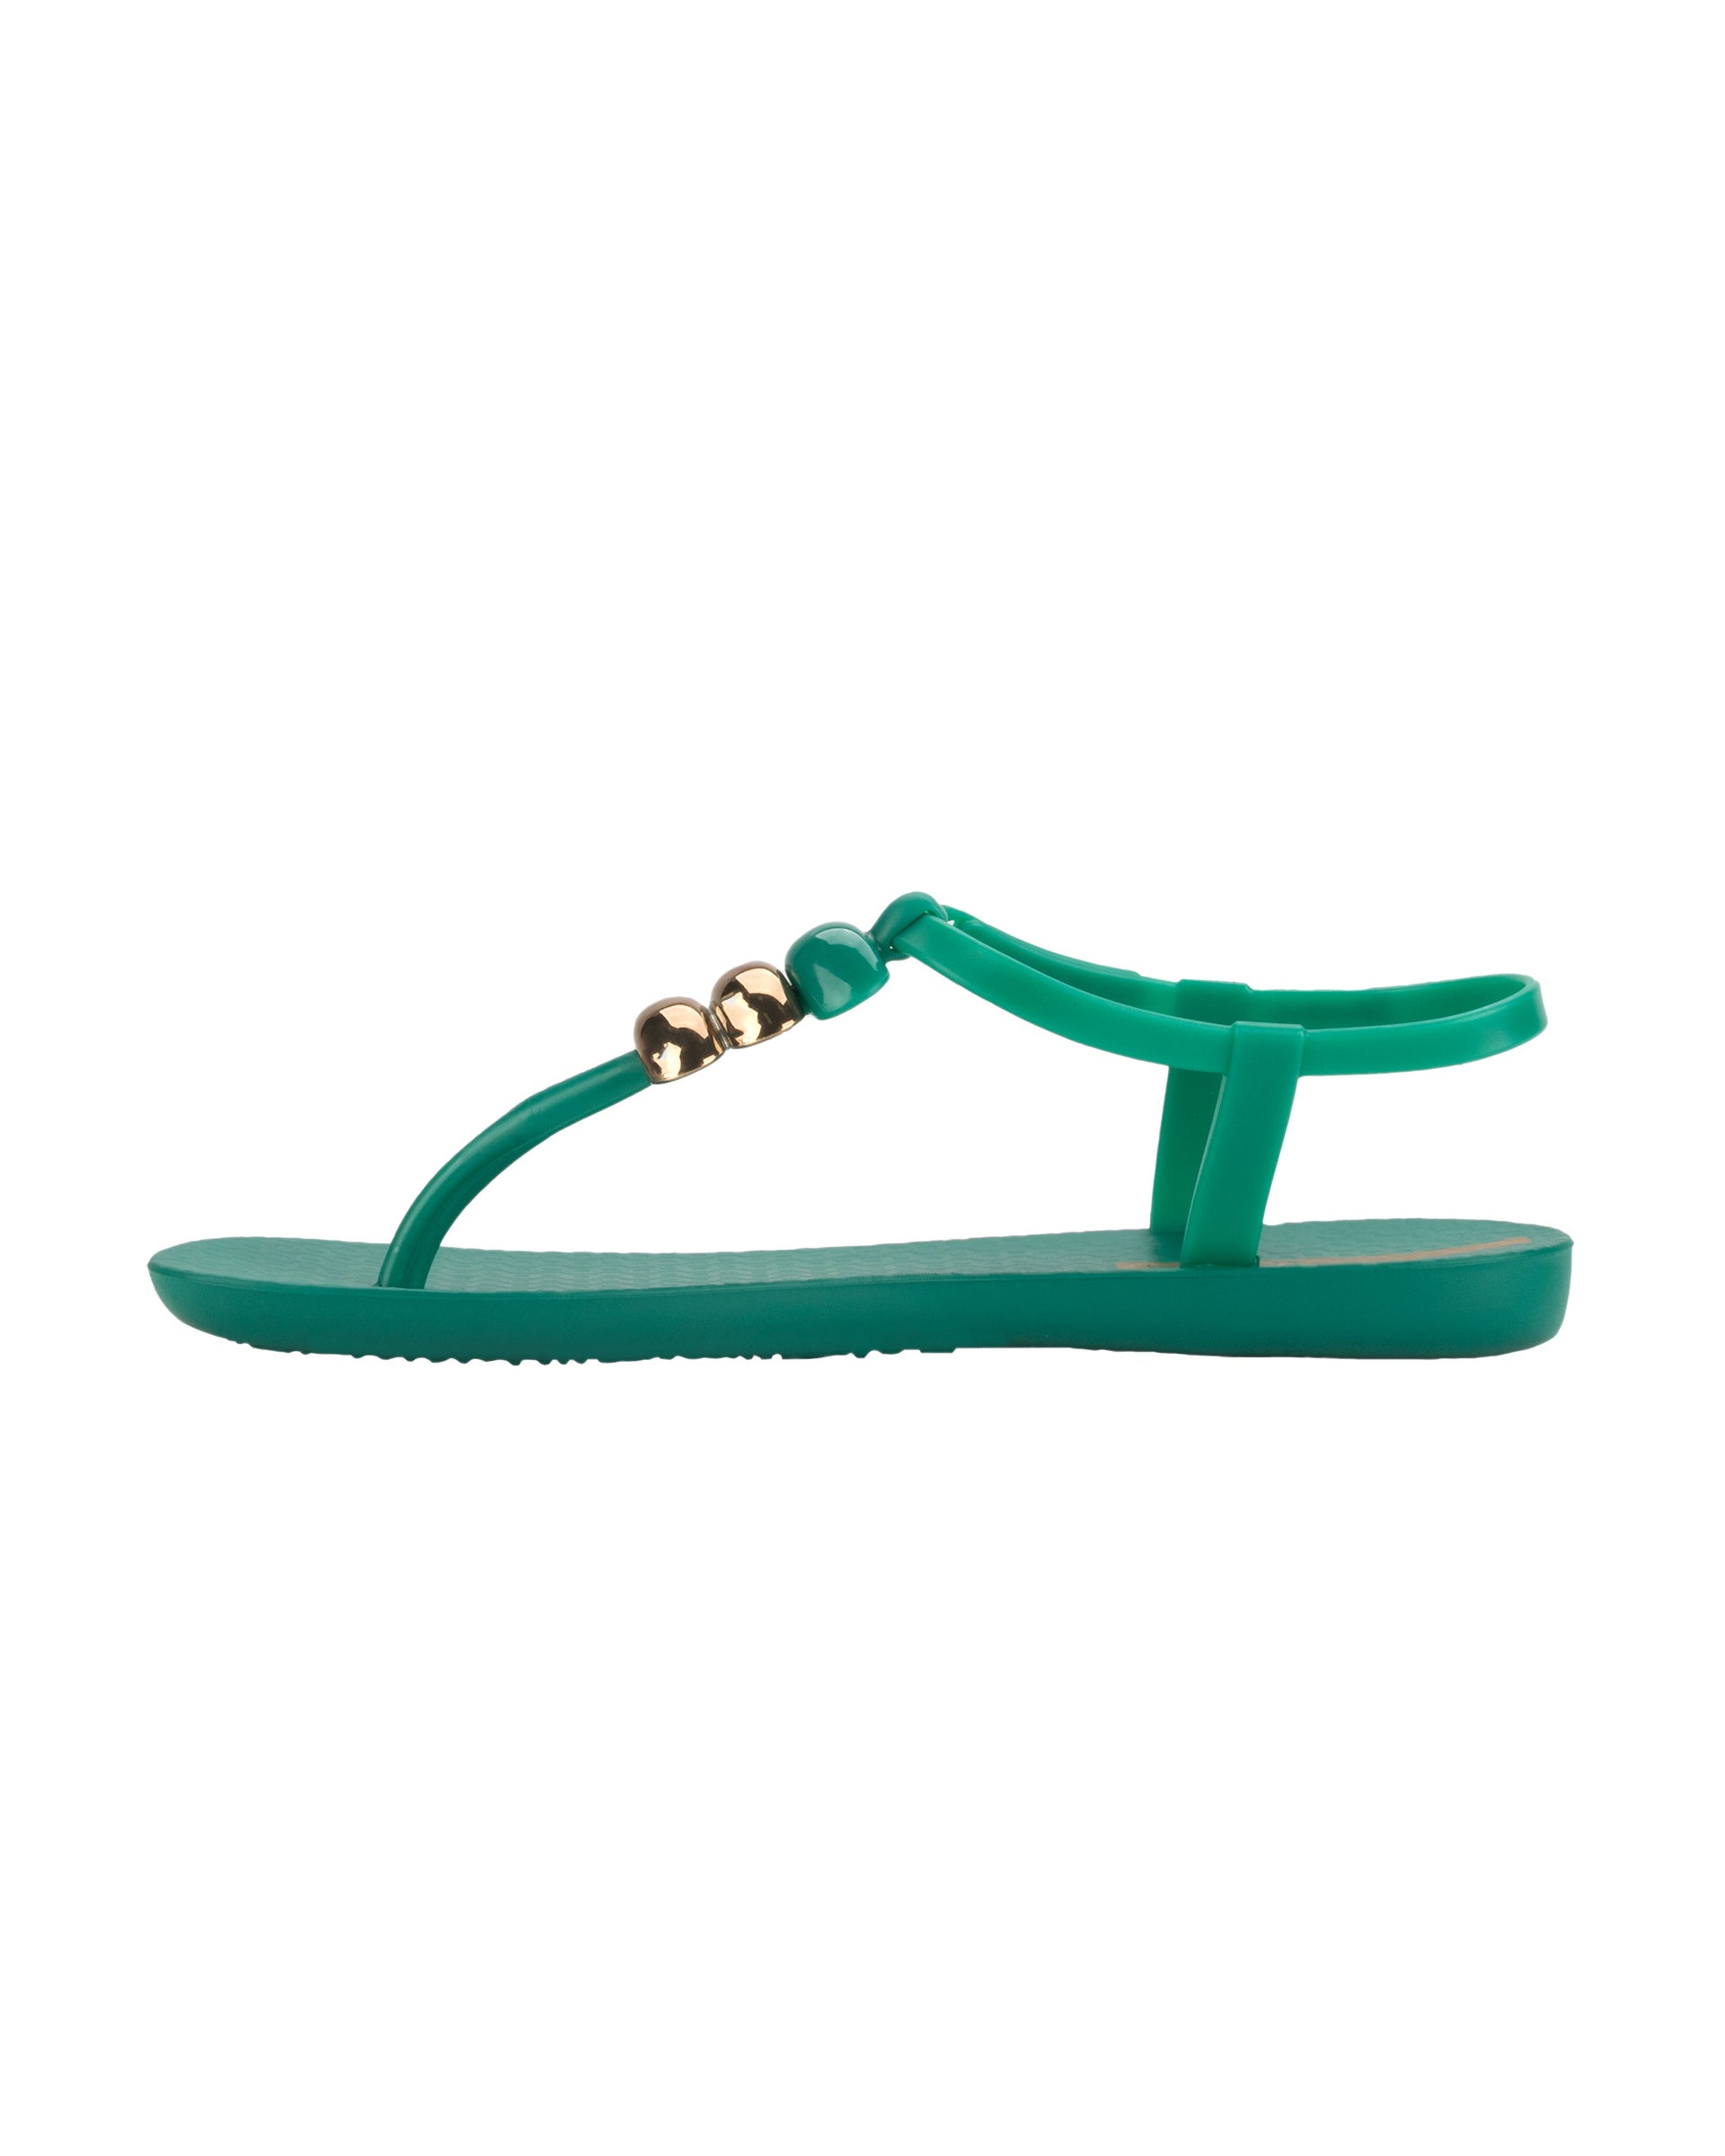 Inner side view of a green Ipanema Class women's sandal with 3 bubble baubles on the t-strap.